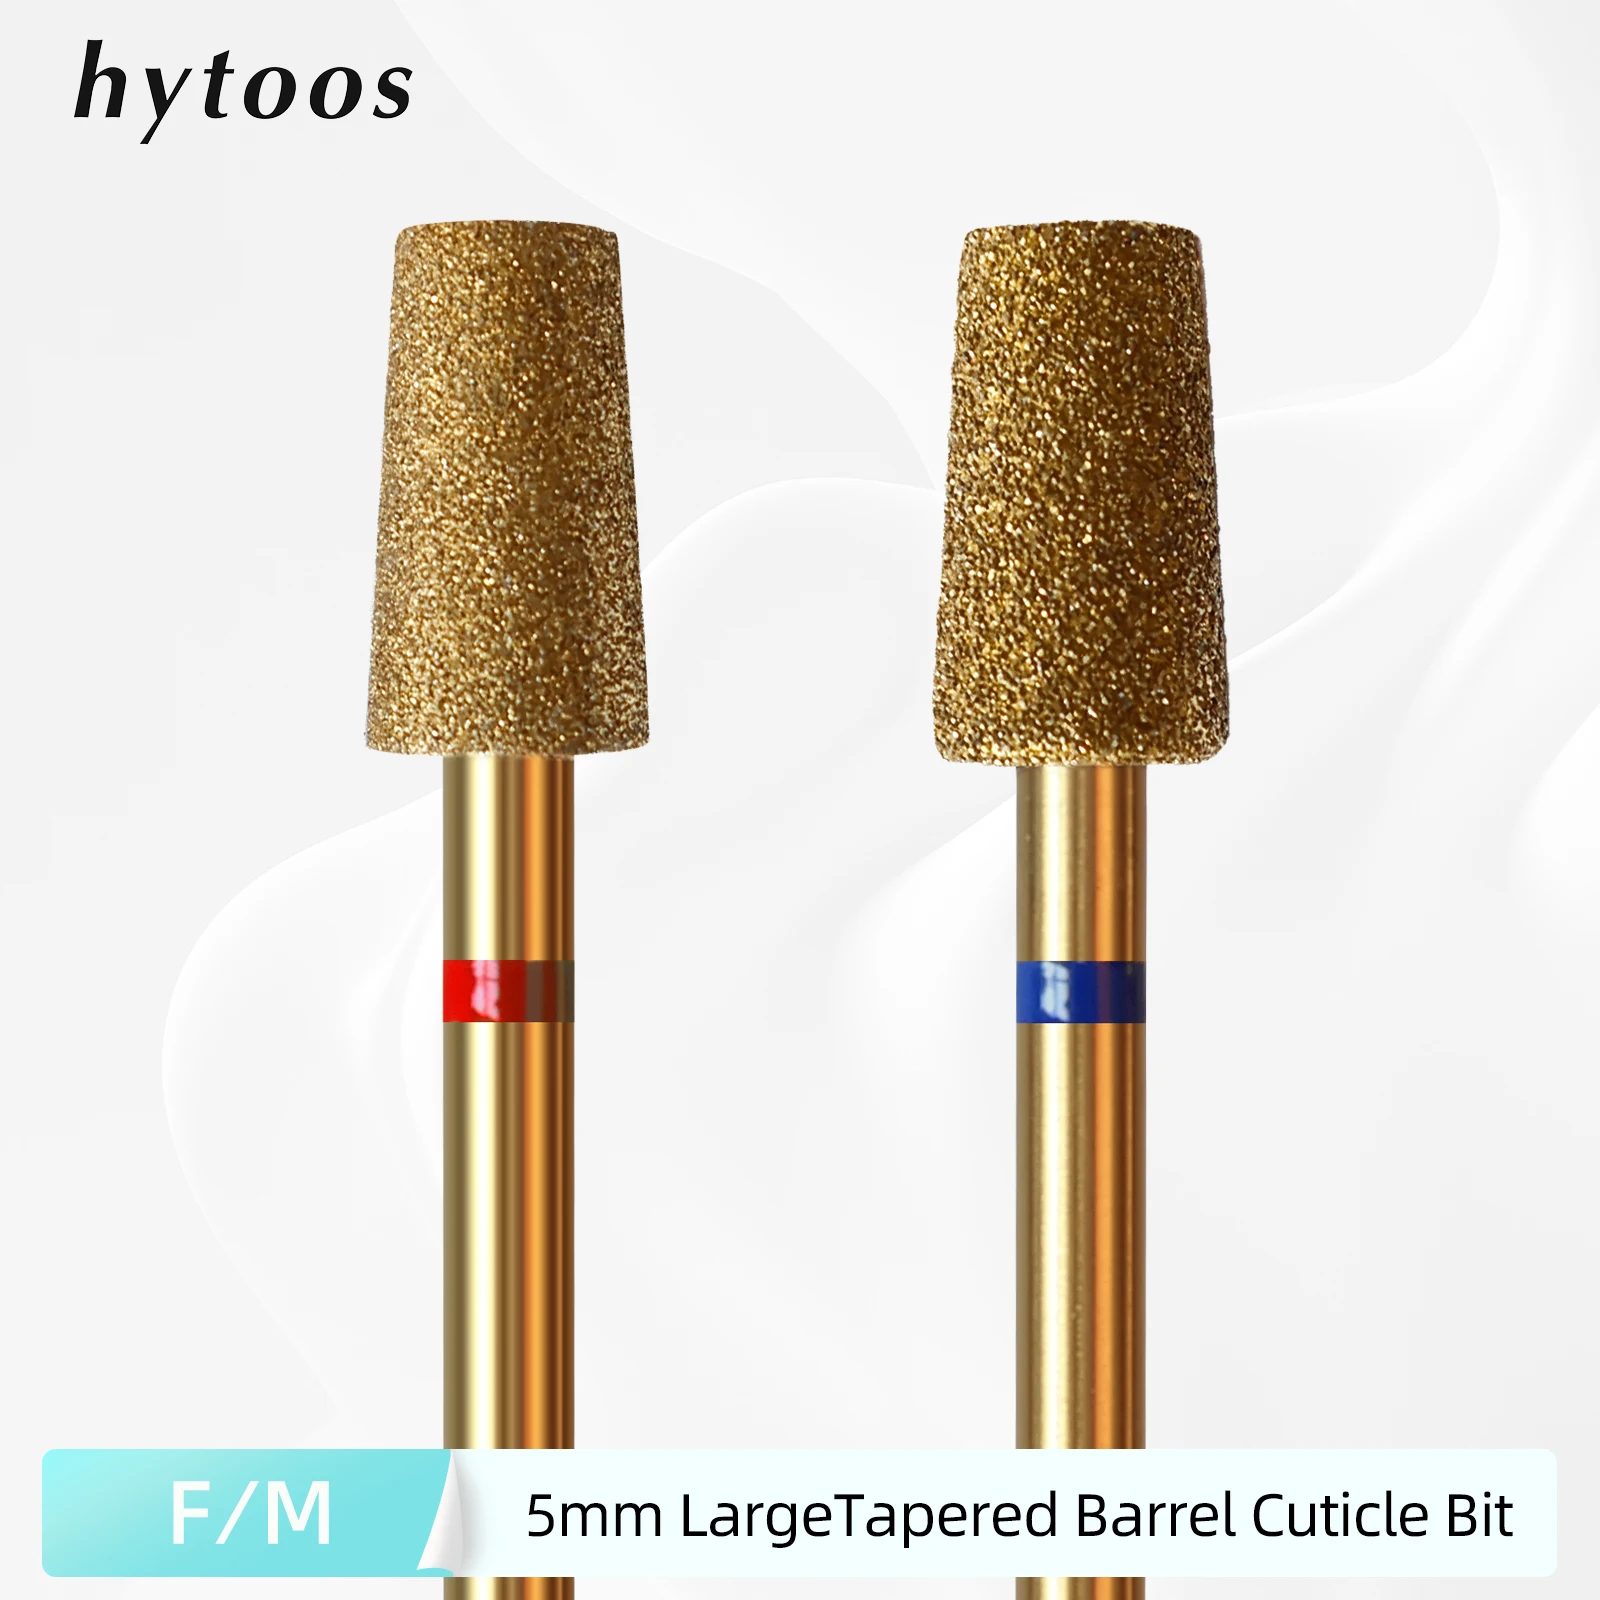 HYTOOS 5mm Large Tapered Barrel Cuticle Clean Nail Drill Bit, Titanium Russian Diamond Nail Bits Nail Cleaner Accessories Tool